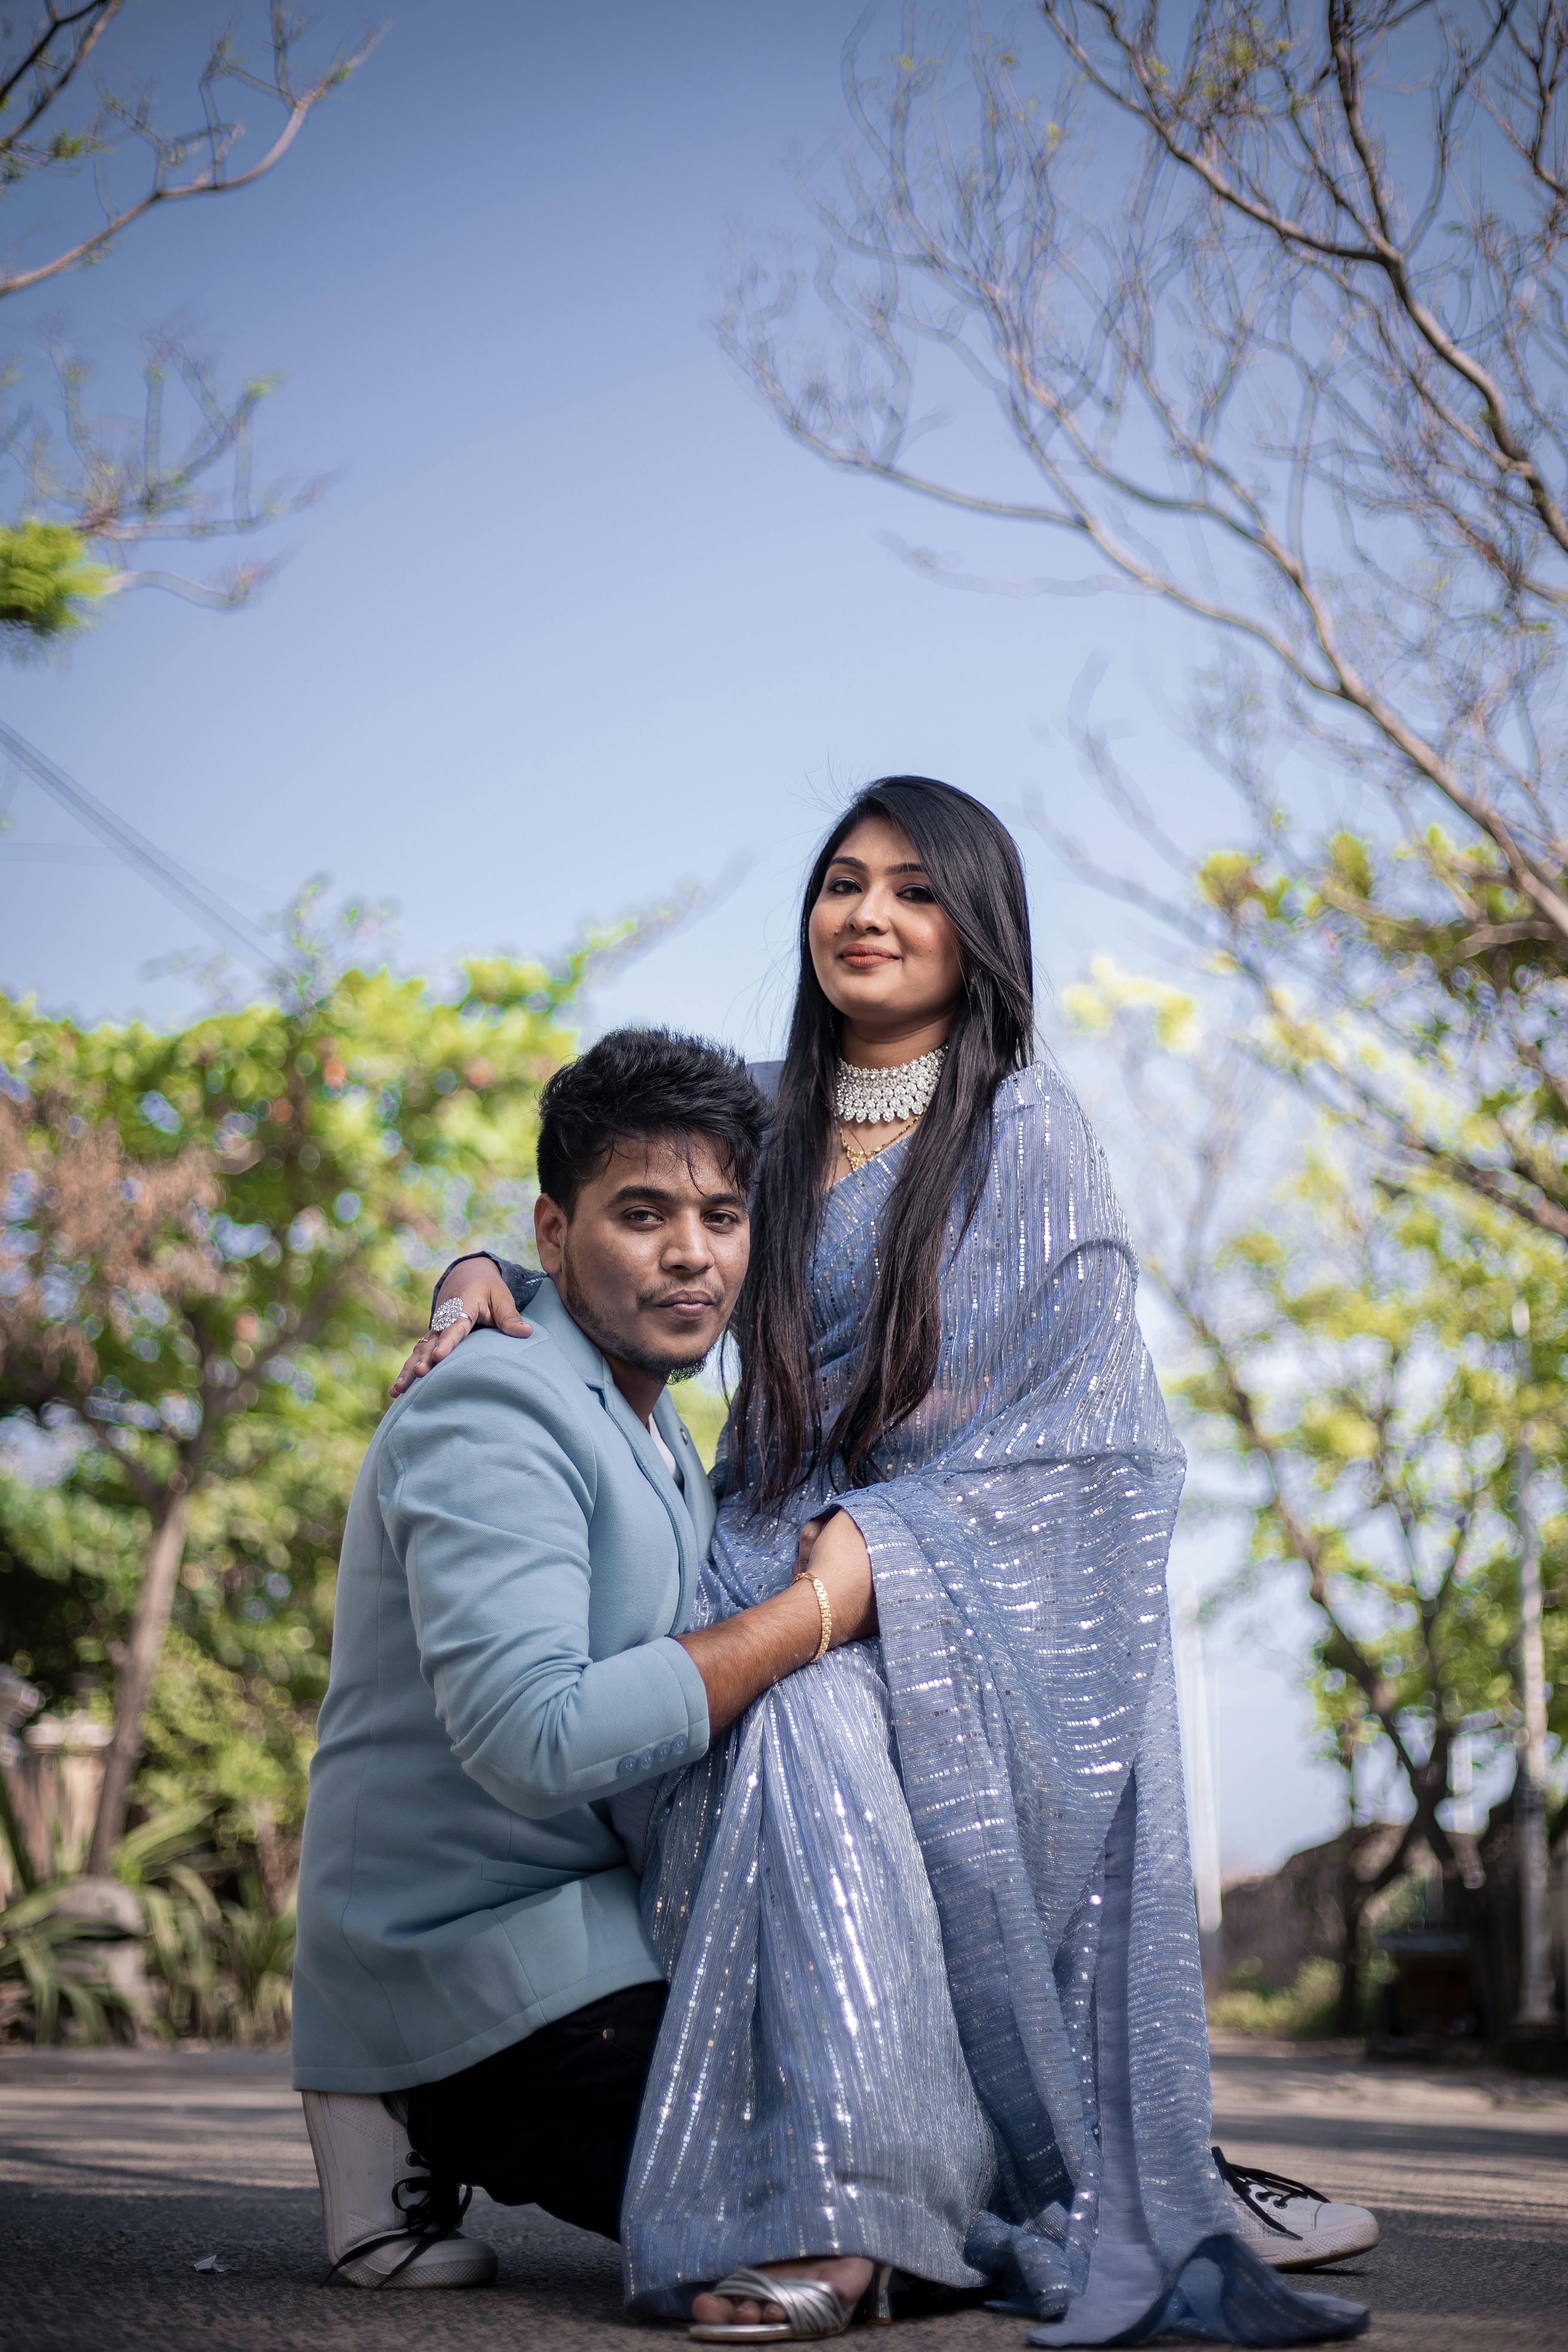 Kerala Wedding Styles shared a post on Instagram: “@canopyweddingstories  #keralaweddingstyle… | Couple photography poses, Photoshoot poses, Cute  couples photography